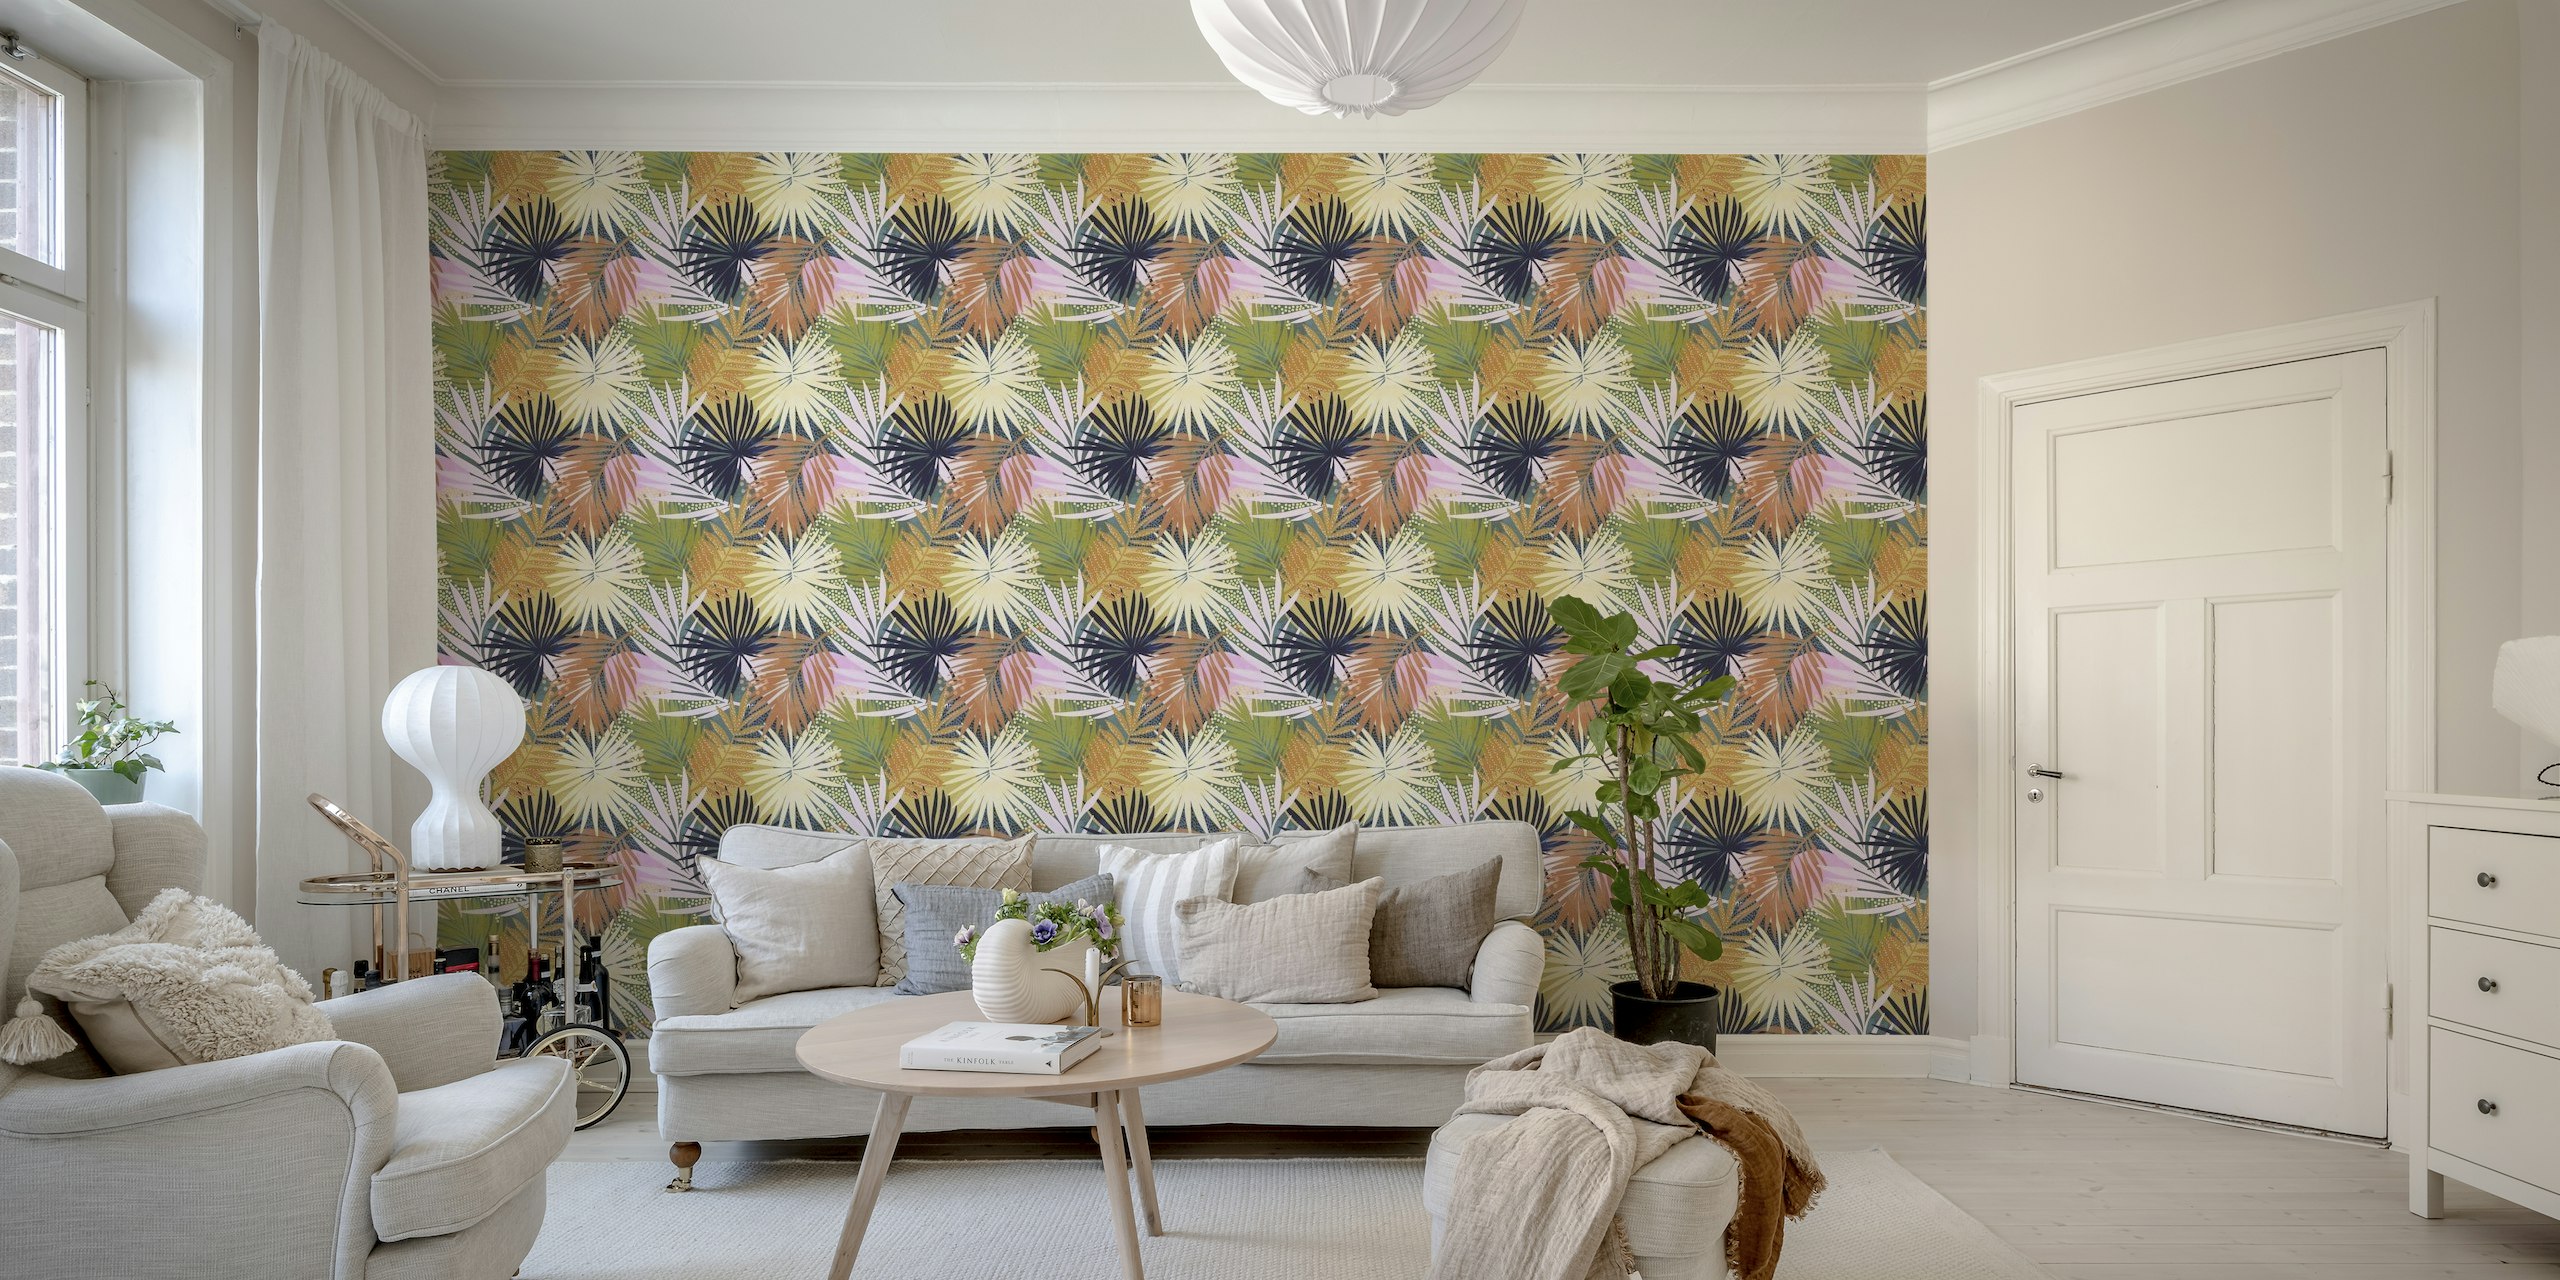 Retro Boho Palm Pattern 2. Earthy and Pink behang